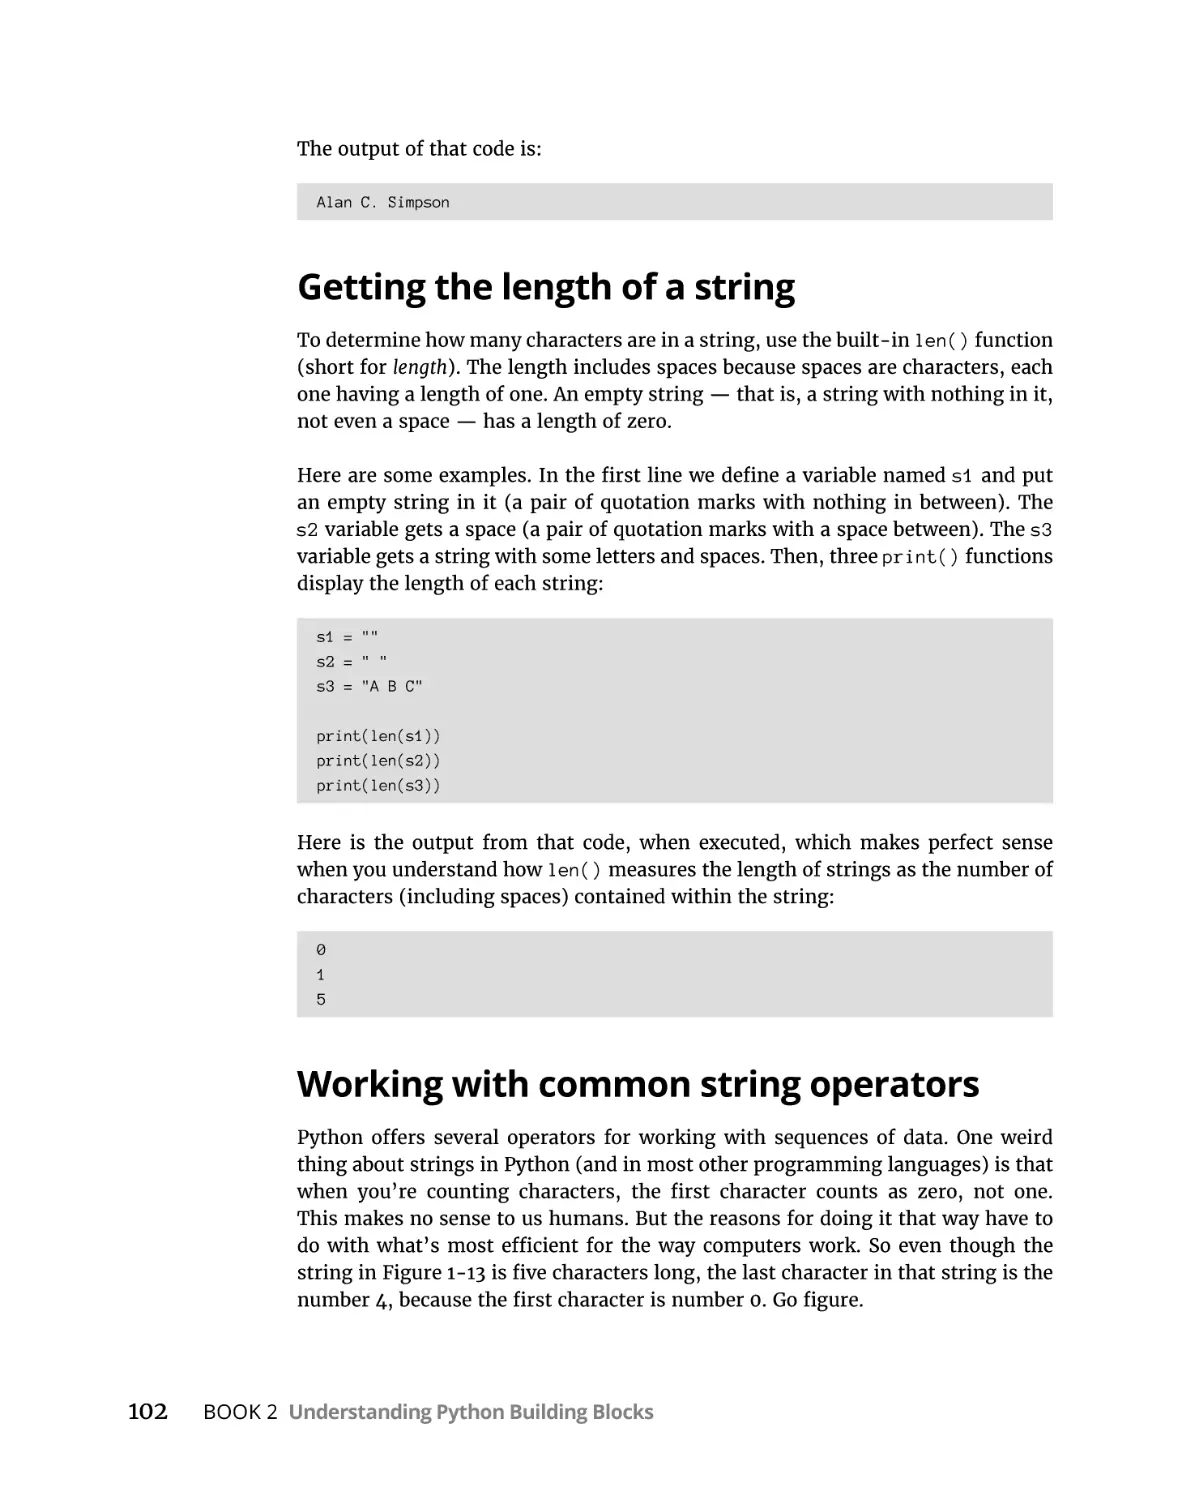 Getting the length of a string
Working with common string operators